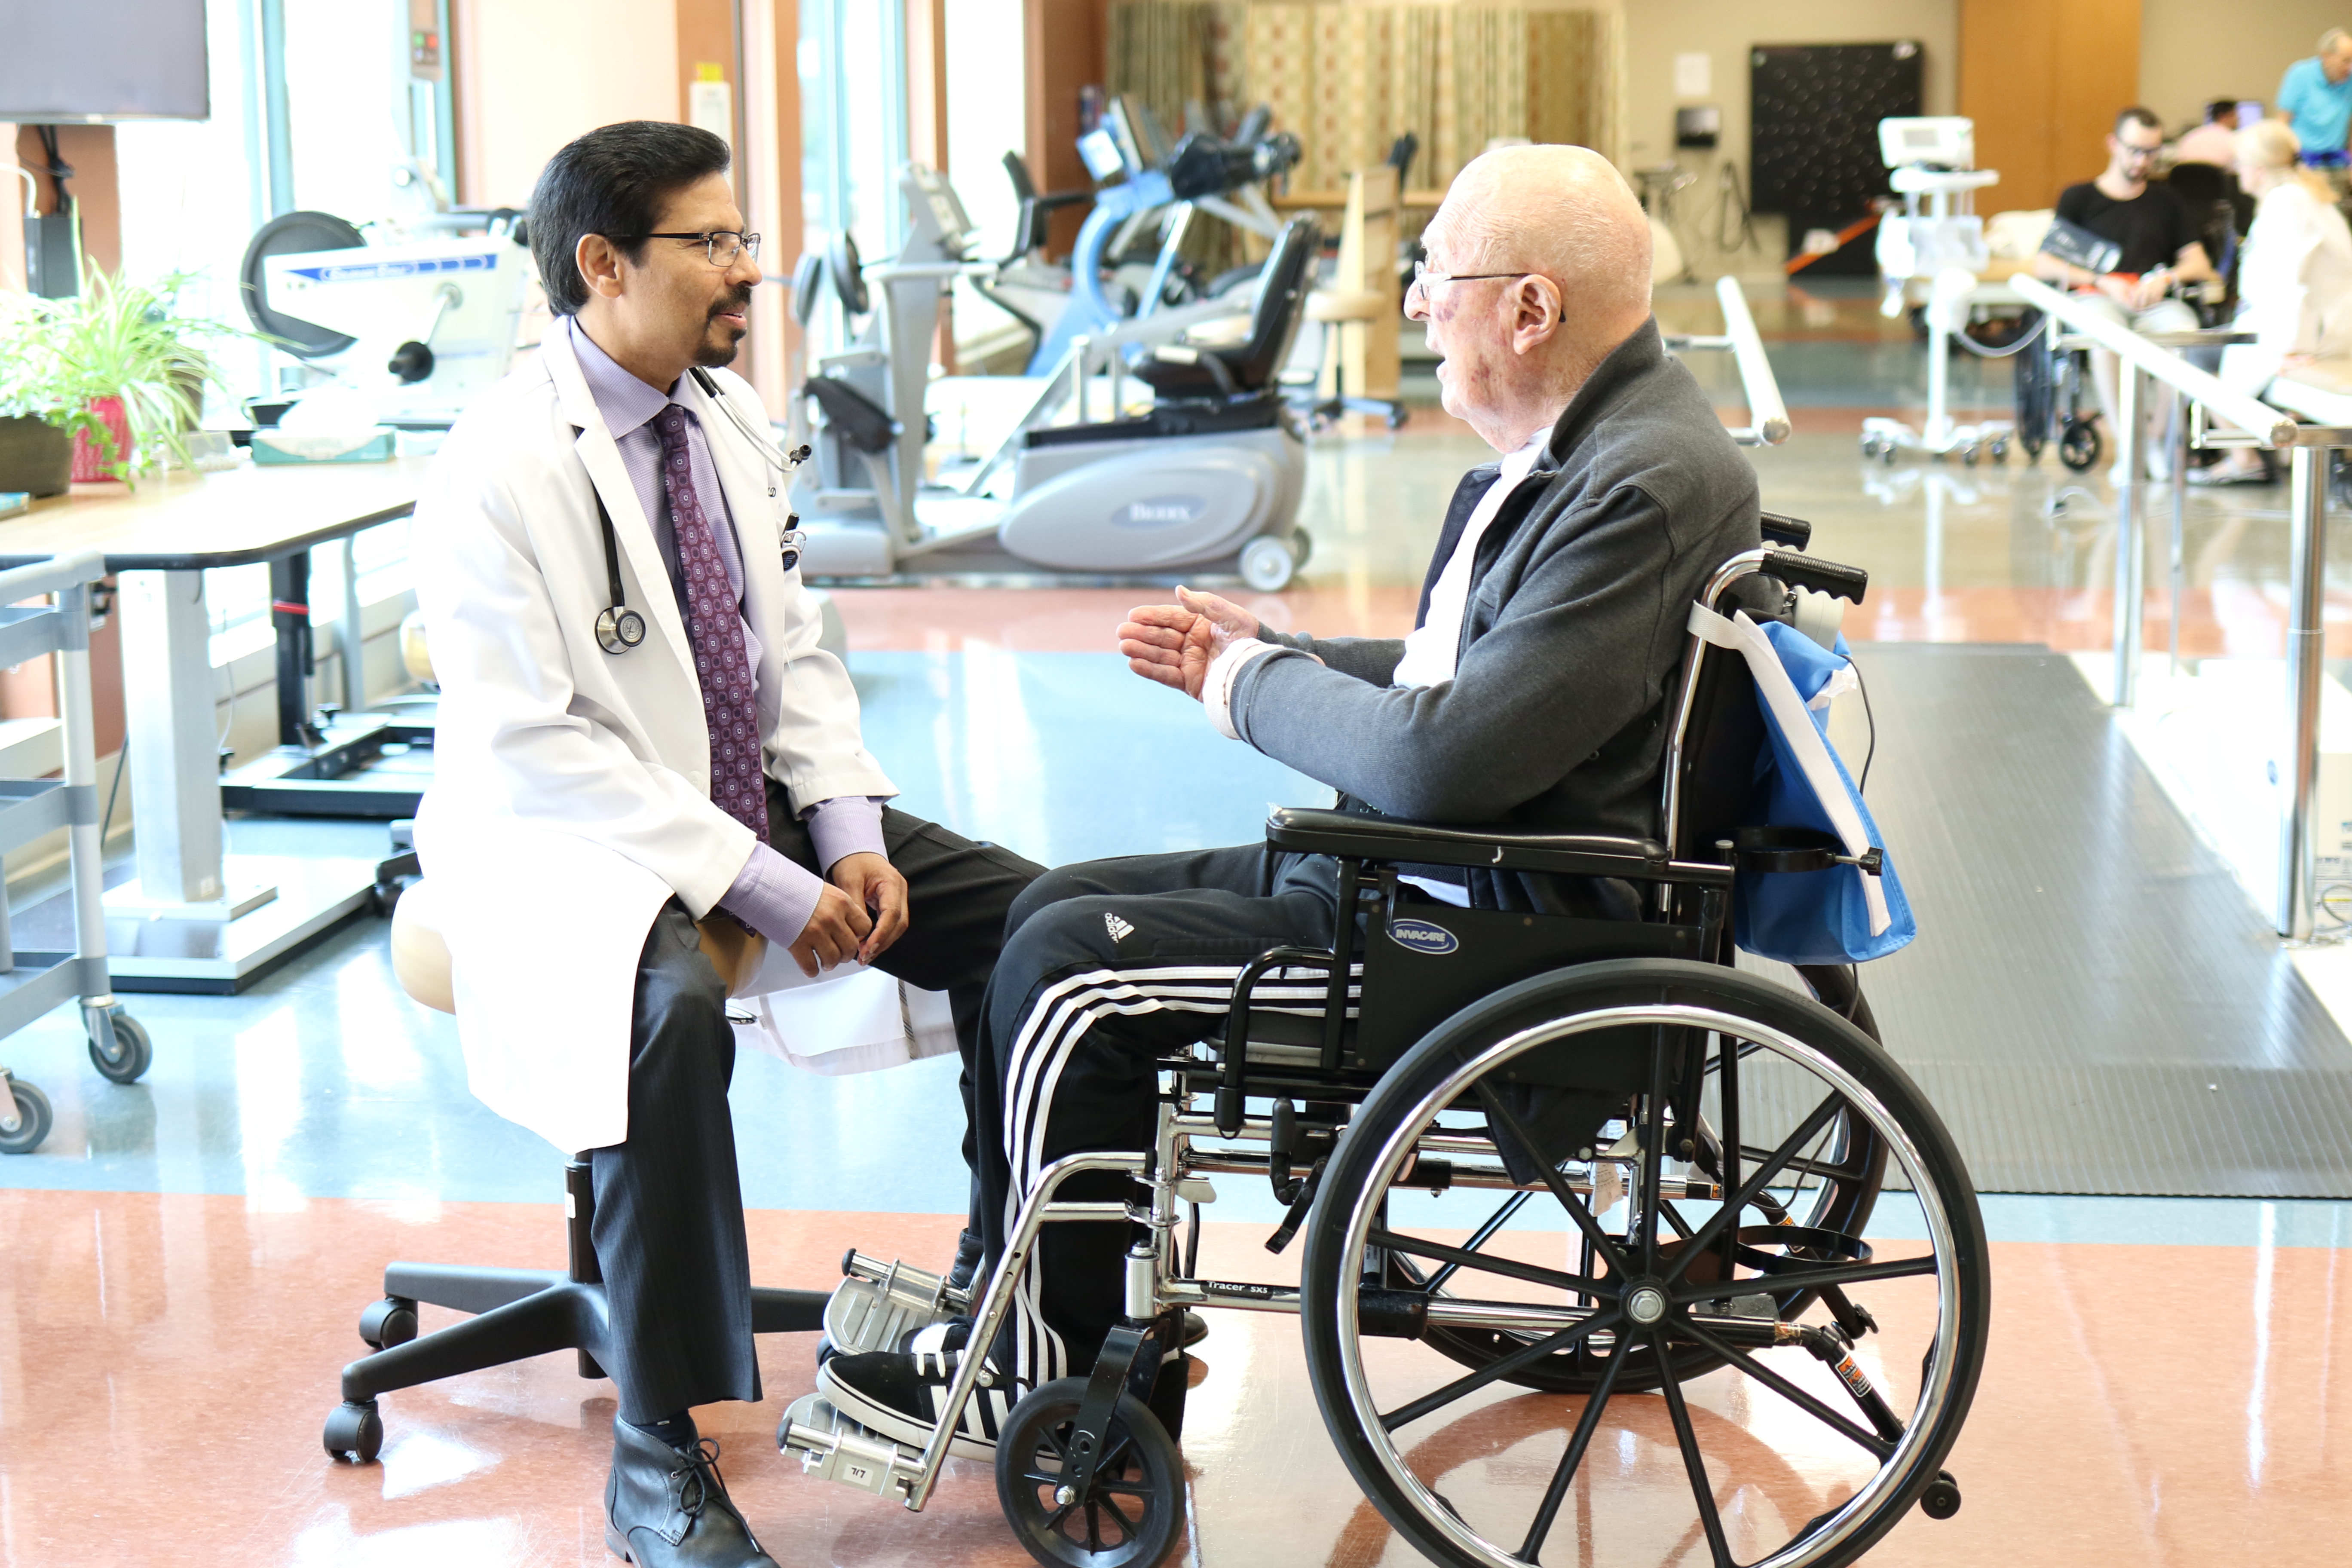 Male physician is seated and communicating with a male patient seated in a wheelchair. The conversation is taking place in the therapy gym where other therapies are taking place.